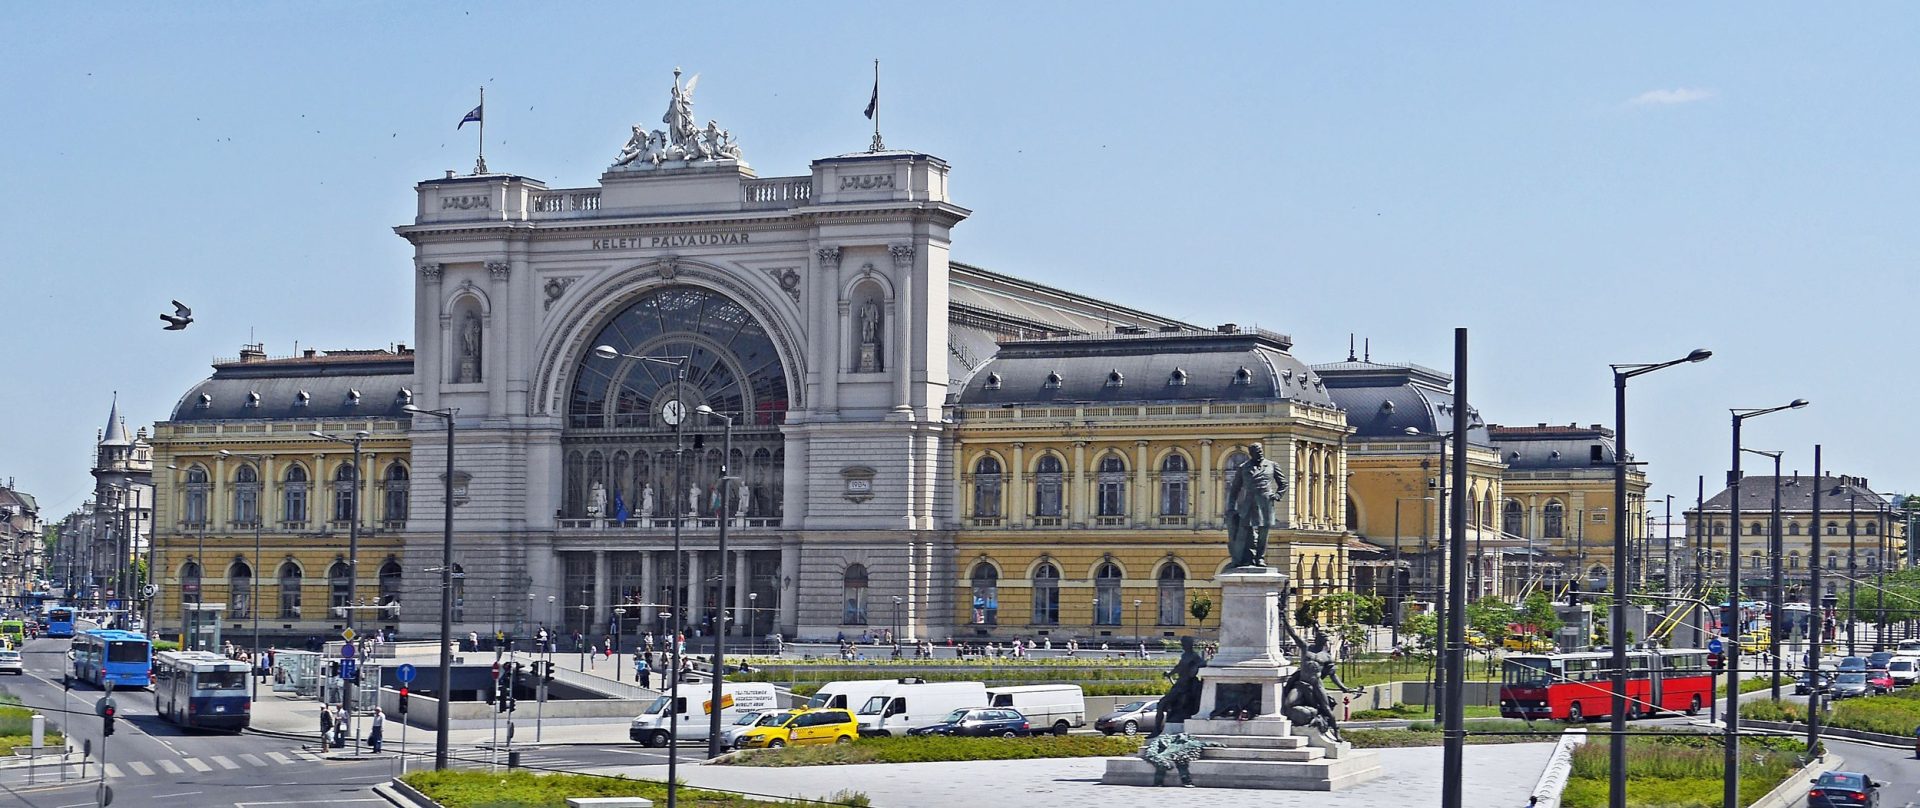 Significant developments have been completed at the Keleti Railway Station